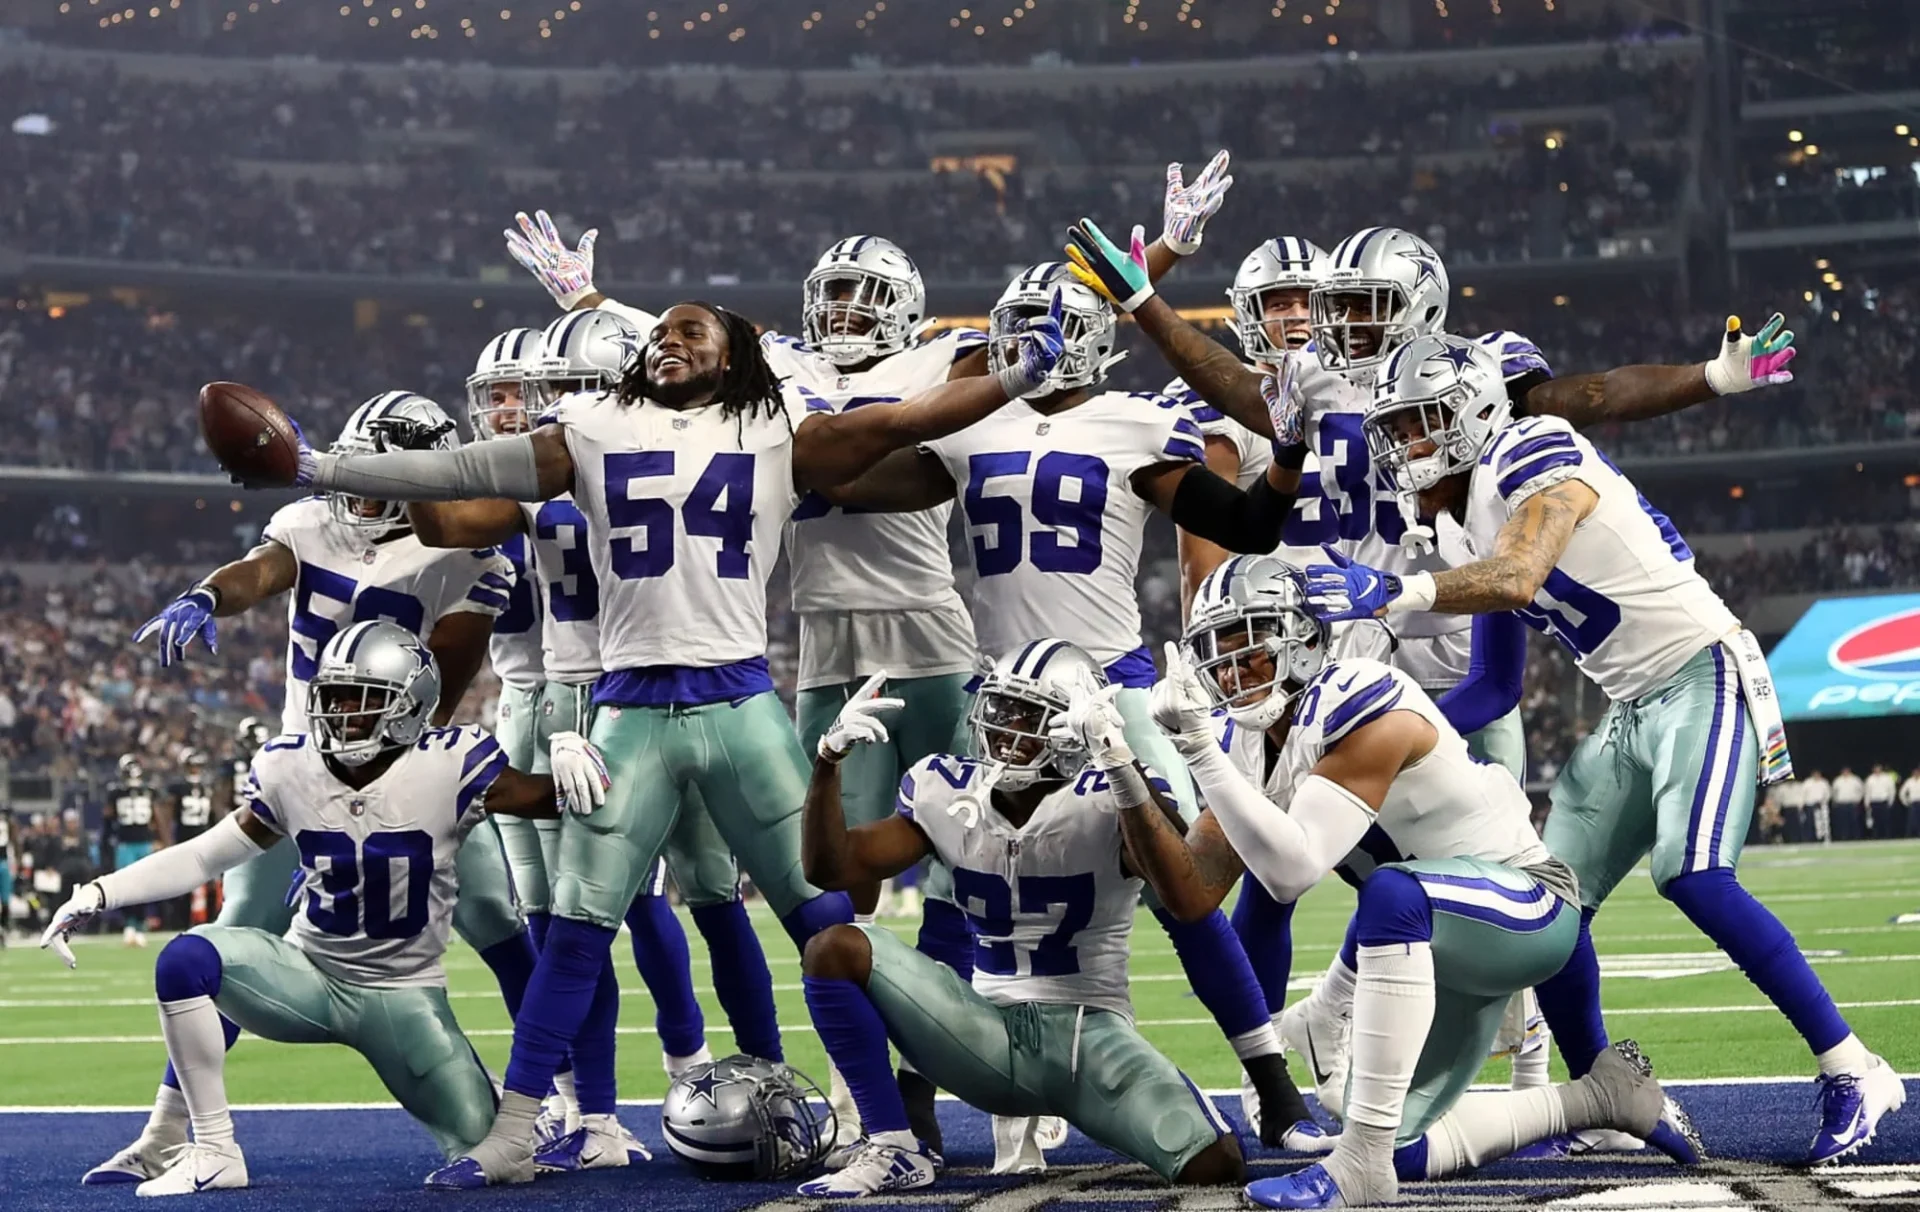 The dallas cowboys are celebrating on the field.